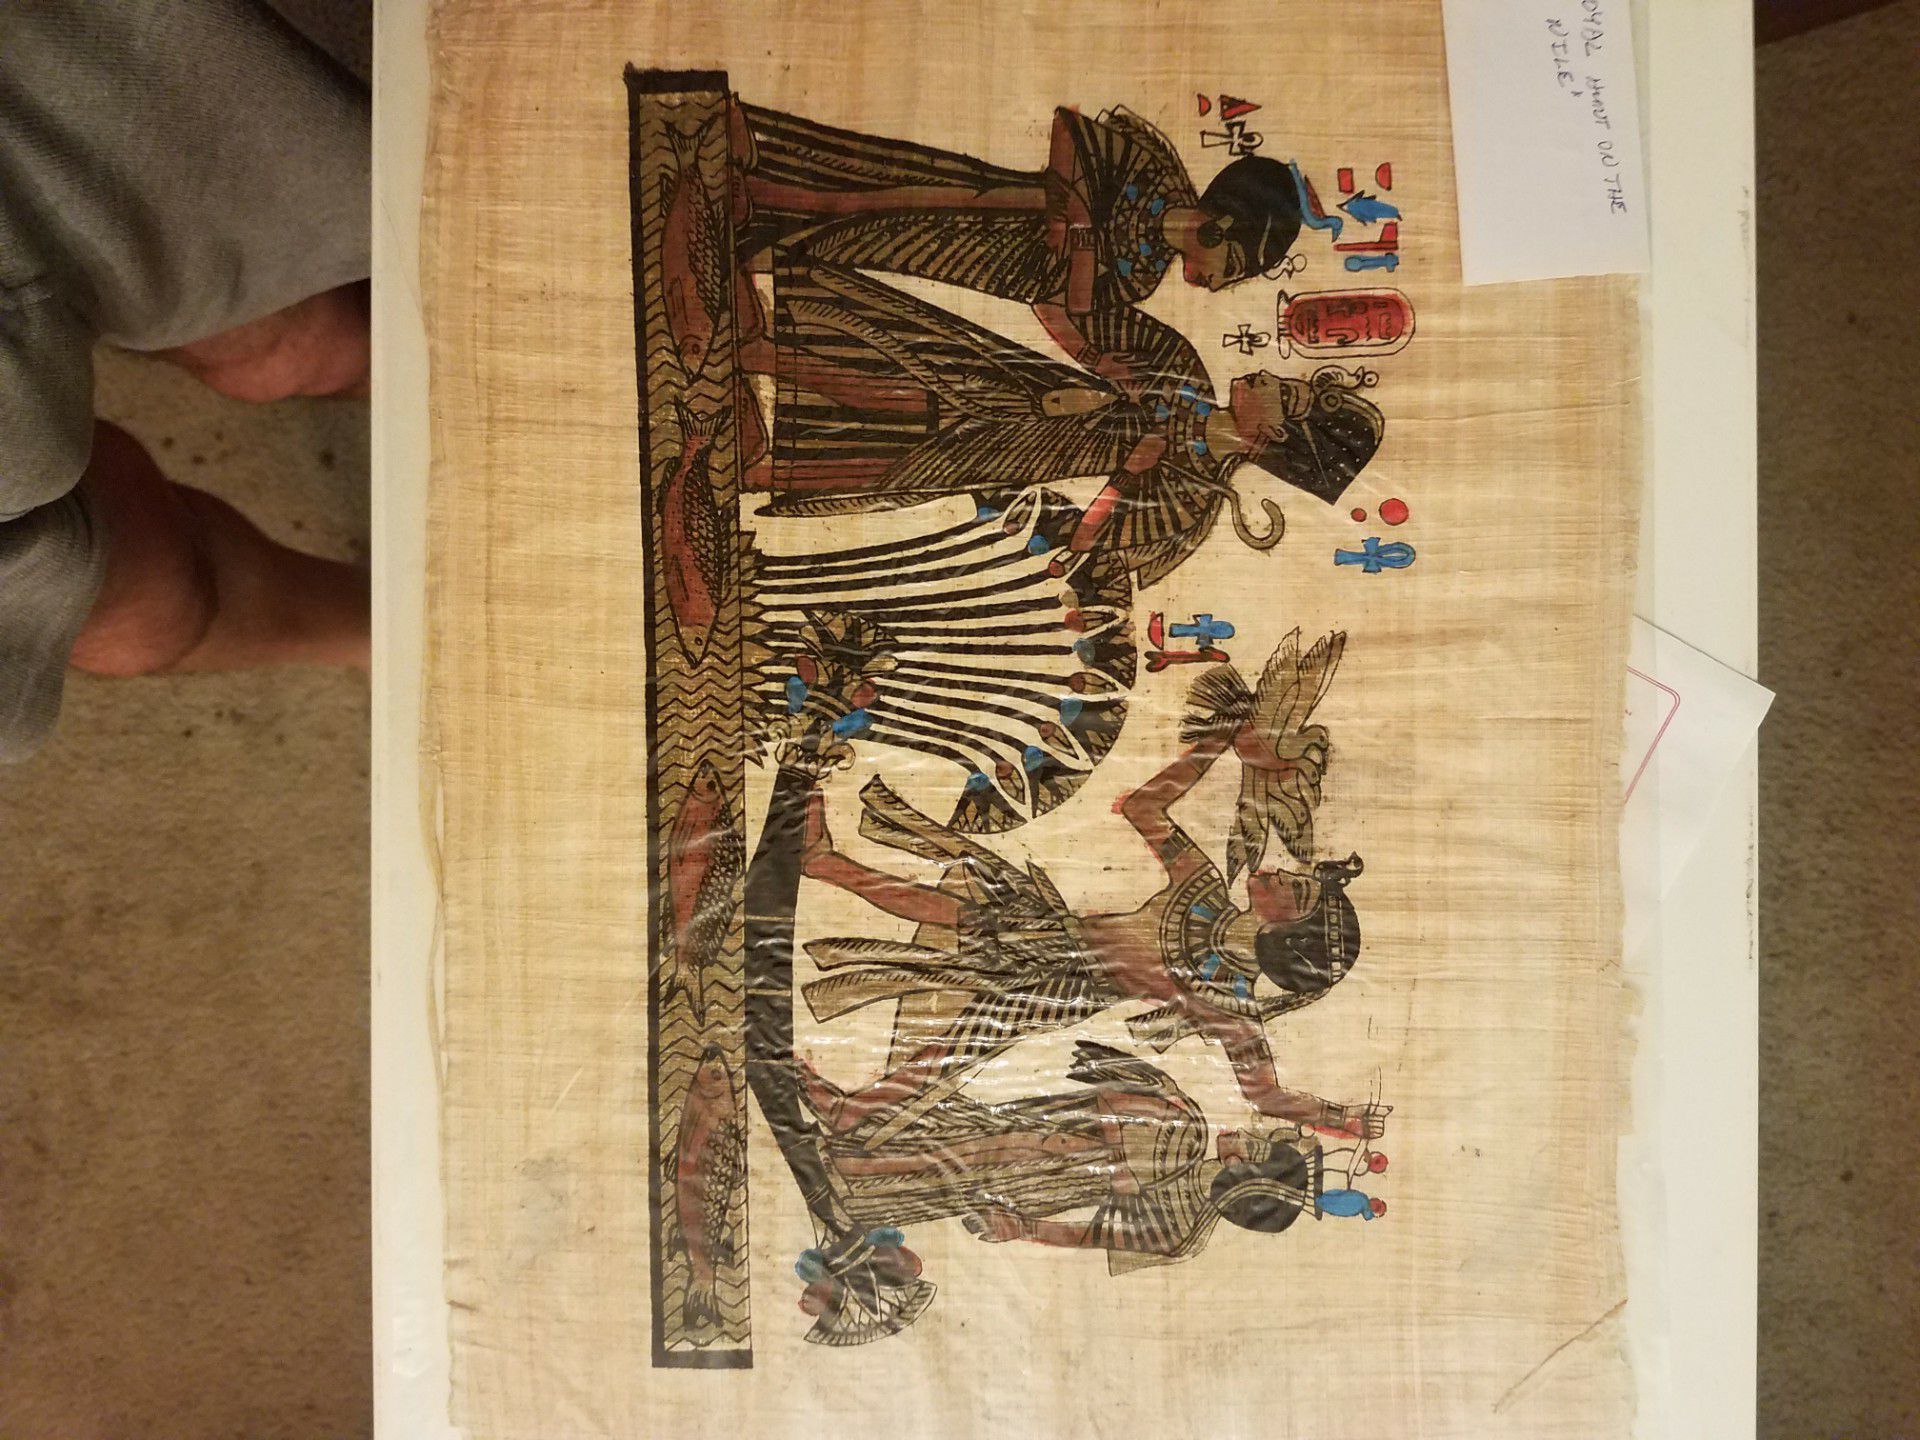 Egyptian Paintings on Papyrus